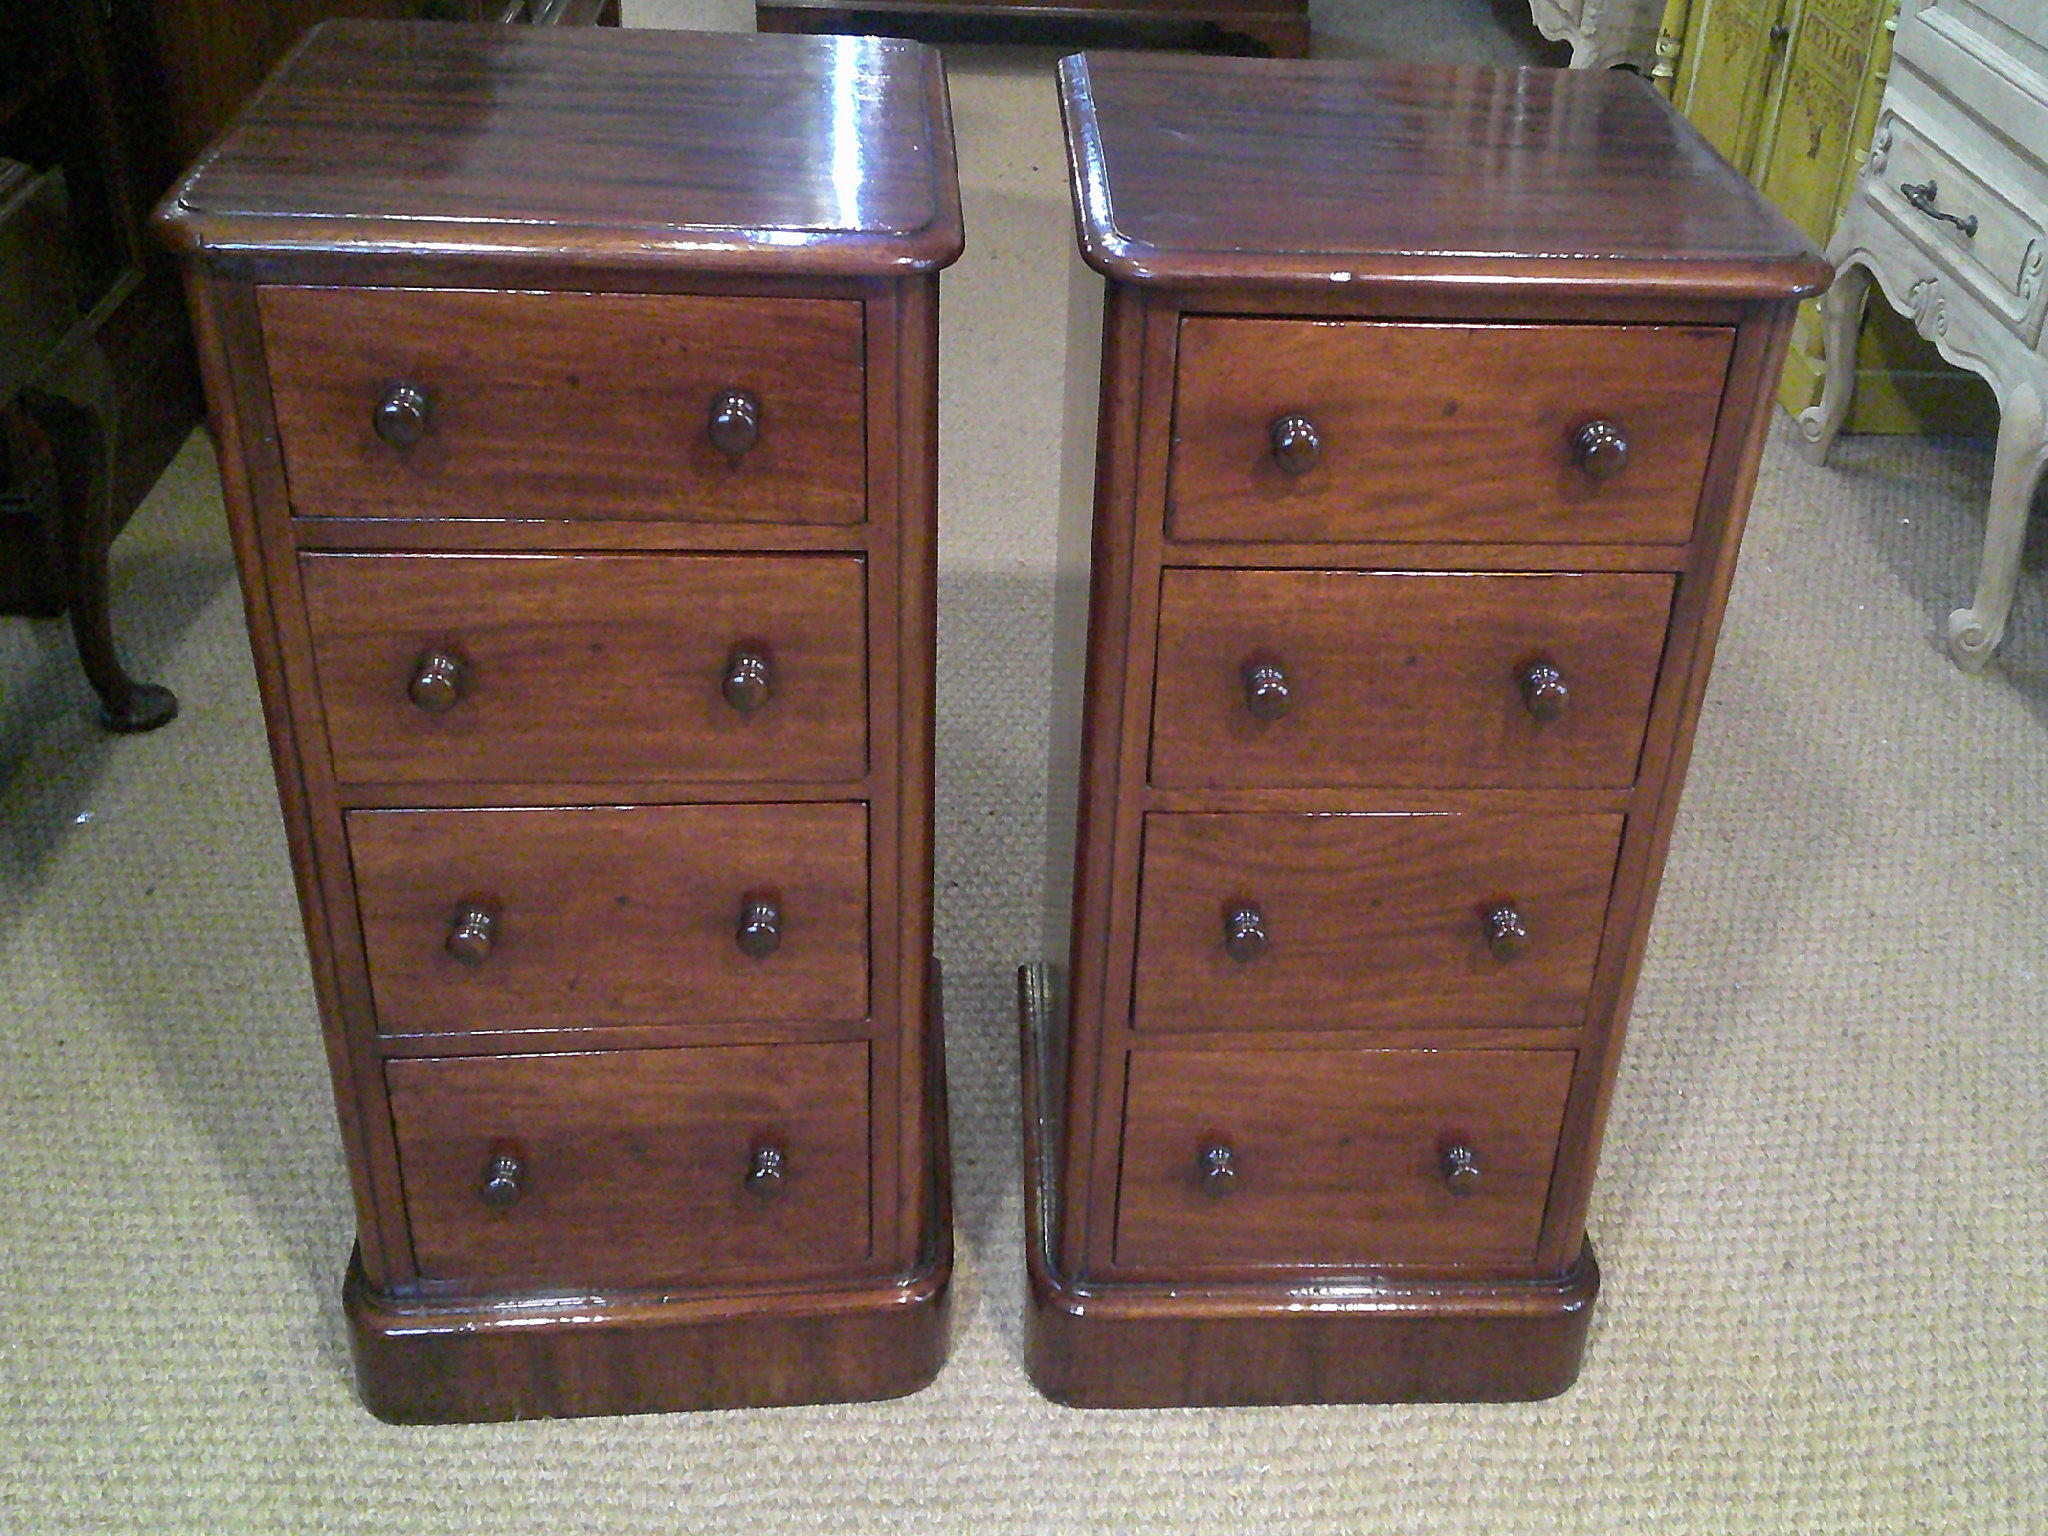 PAIR OF ANTIQUE VICTORIAN MAHOGANY BEDSIDE CHESTS